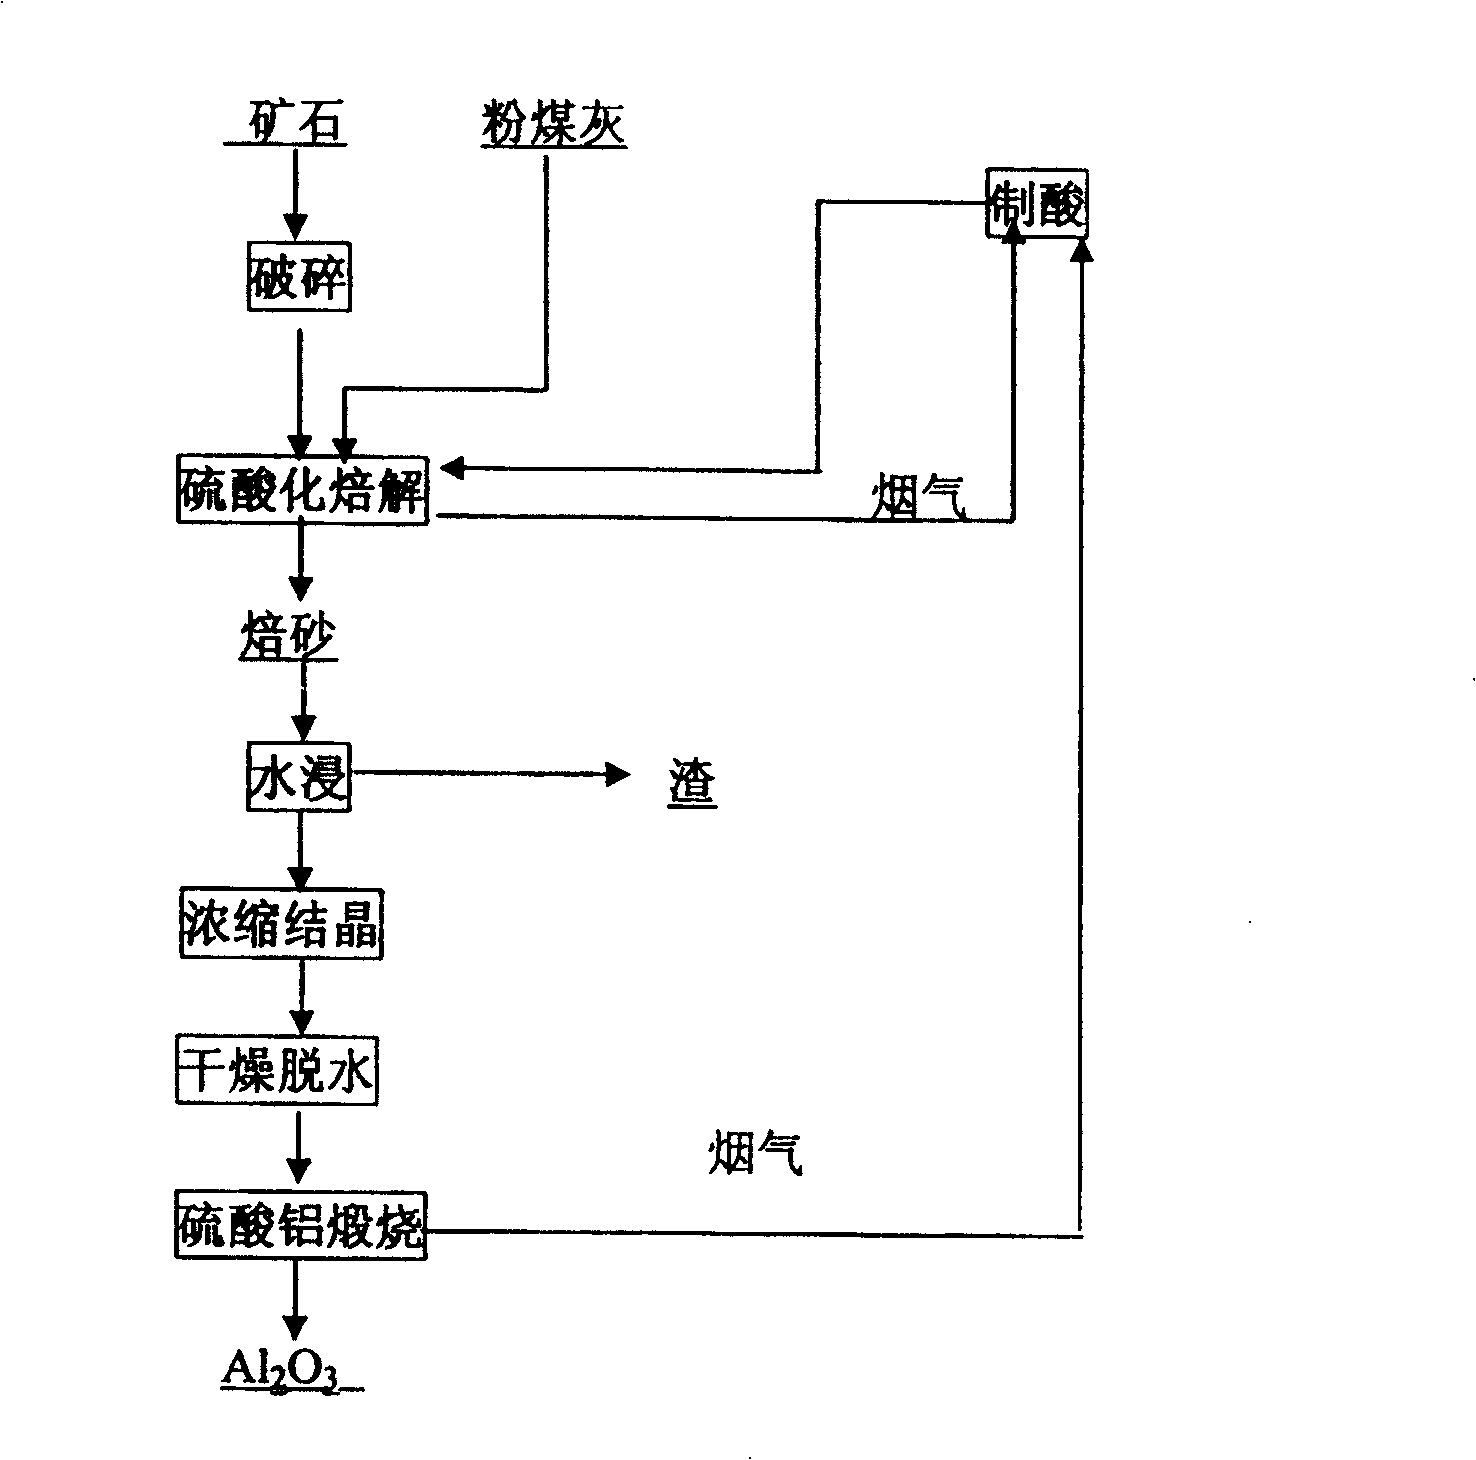 Method of acid extracting aluminium from high-silicon alumina-containing raw mineral materials